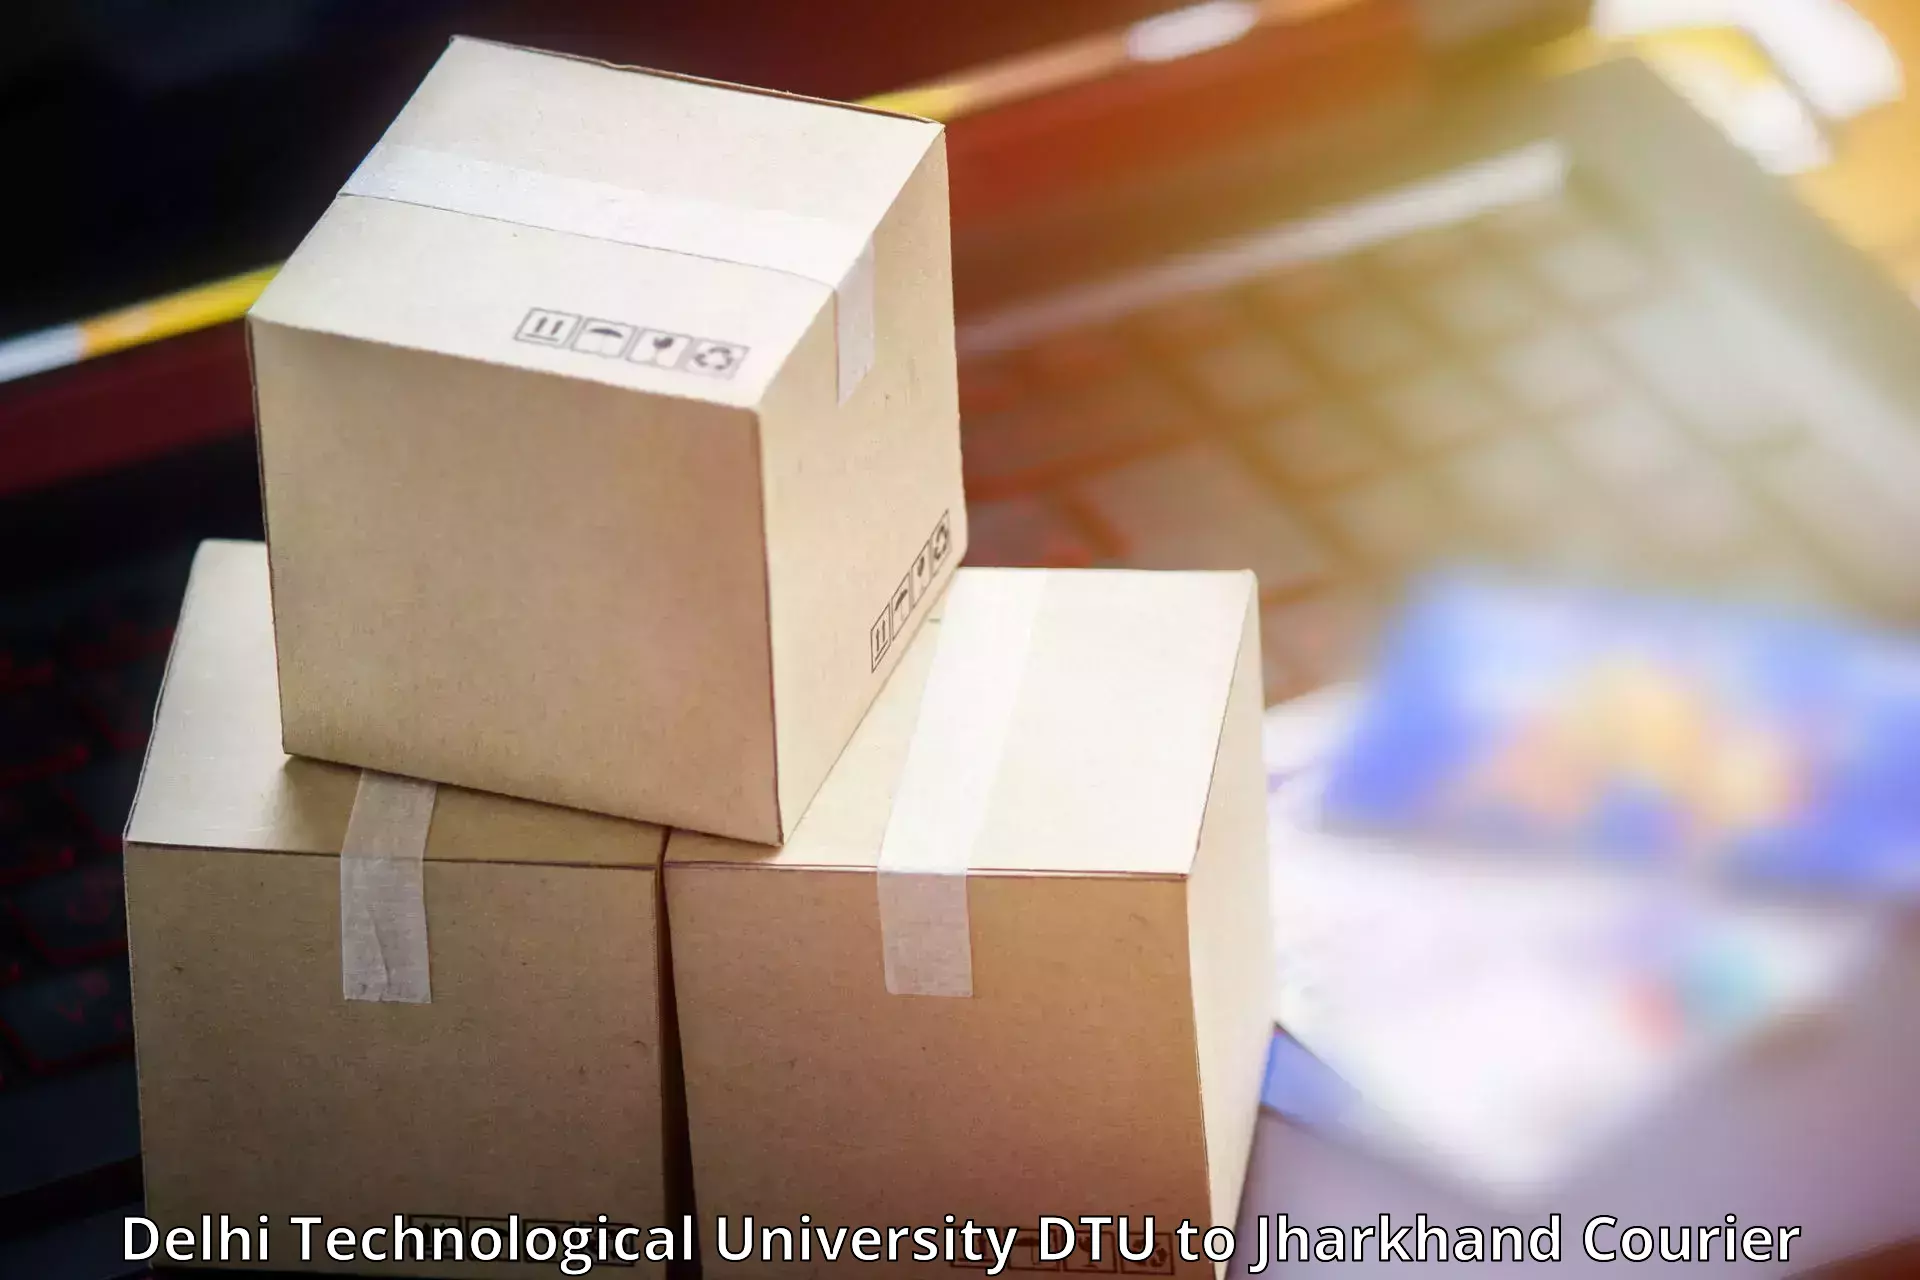 Express package services Delhi Technological University DTU to Manoharpur